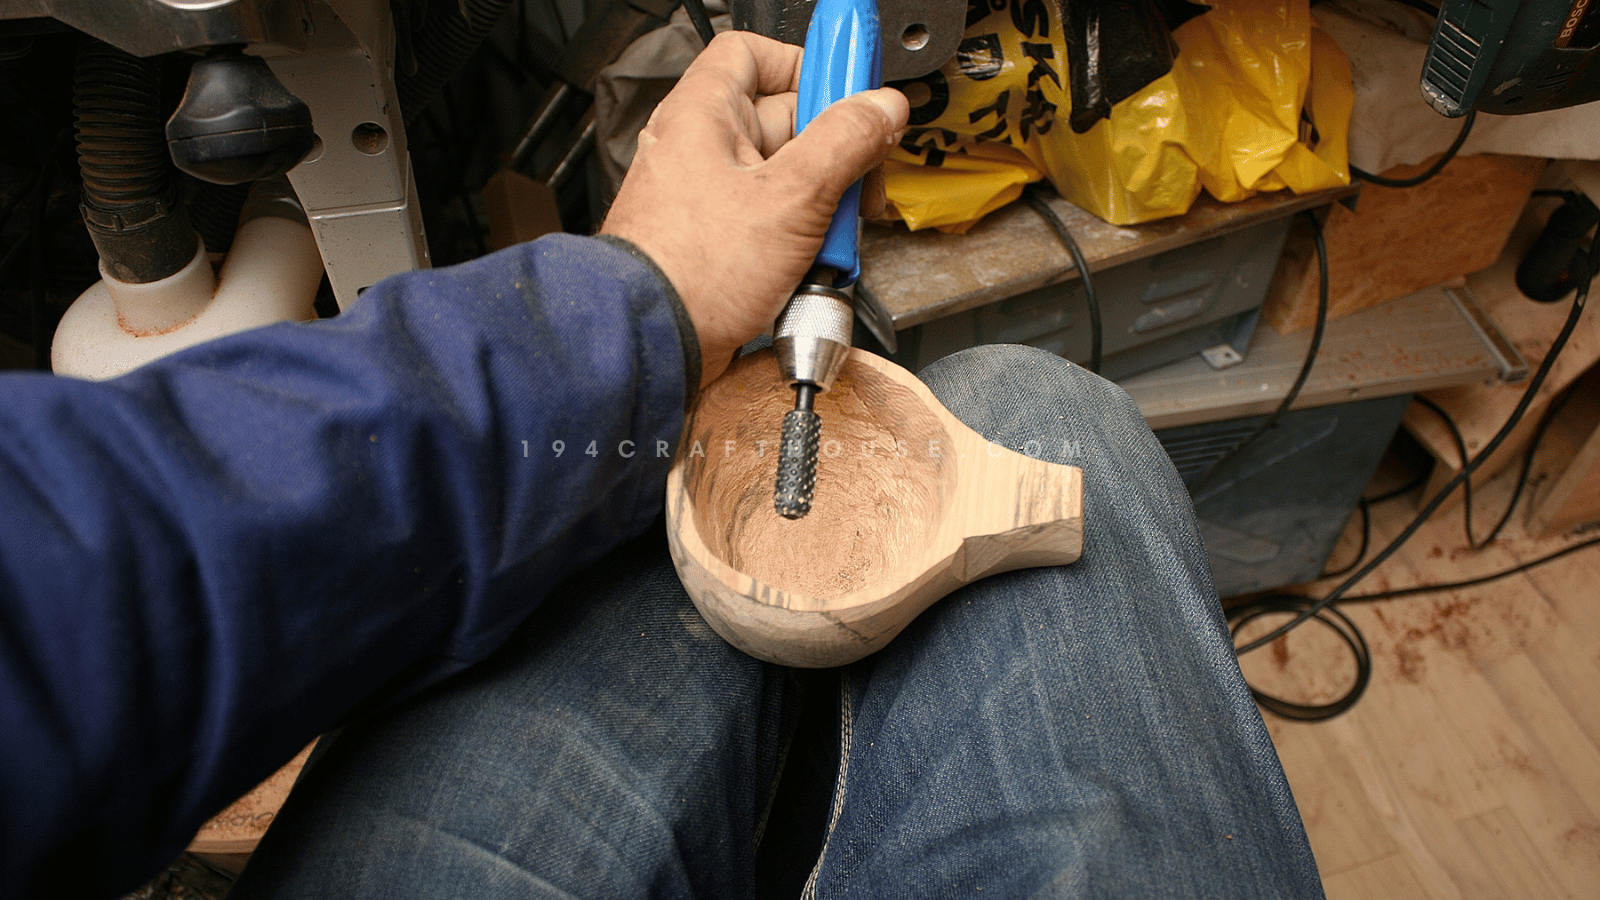 How to make a Kuksa cup step by step - Step 6: Sanding